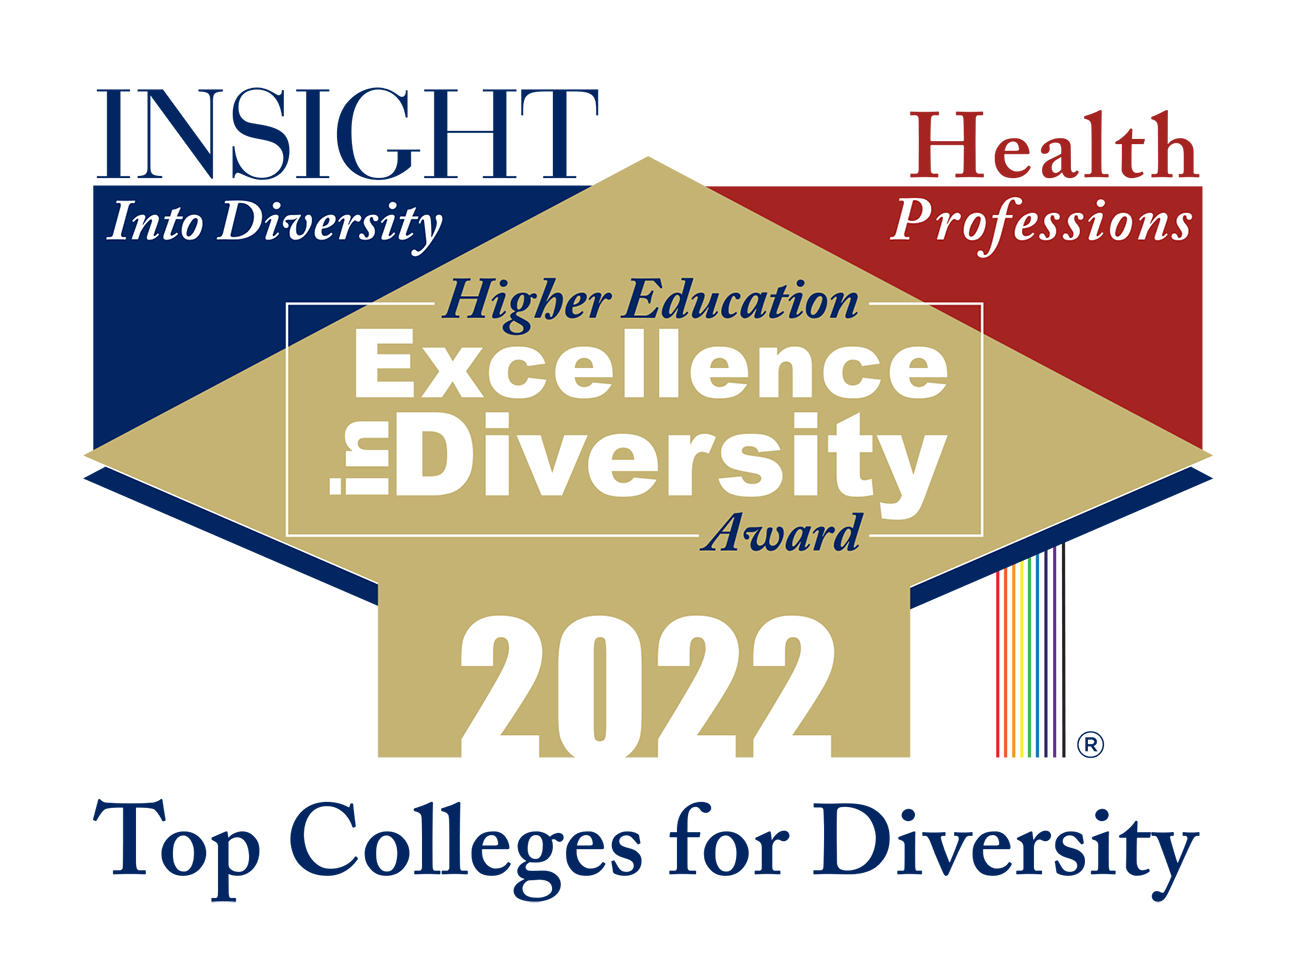 Insight Into Diversity Health Professions Top Colleges for Diversity Award 2022